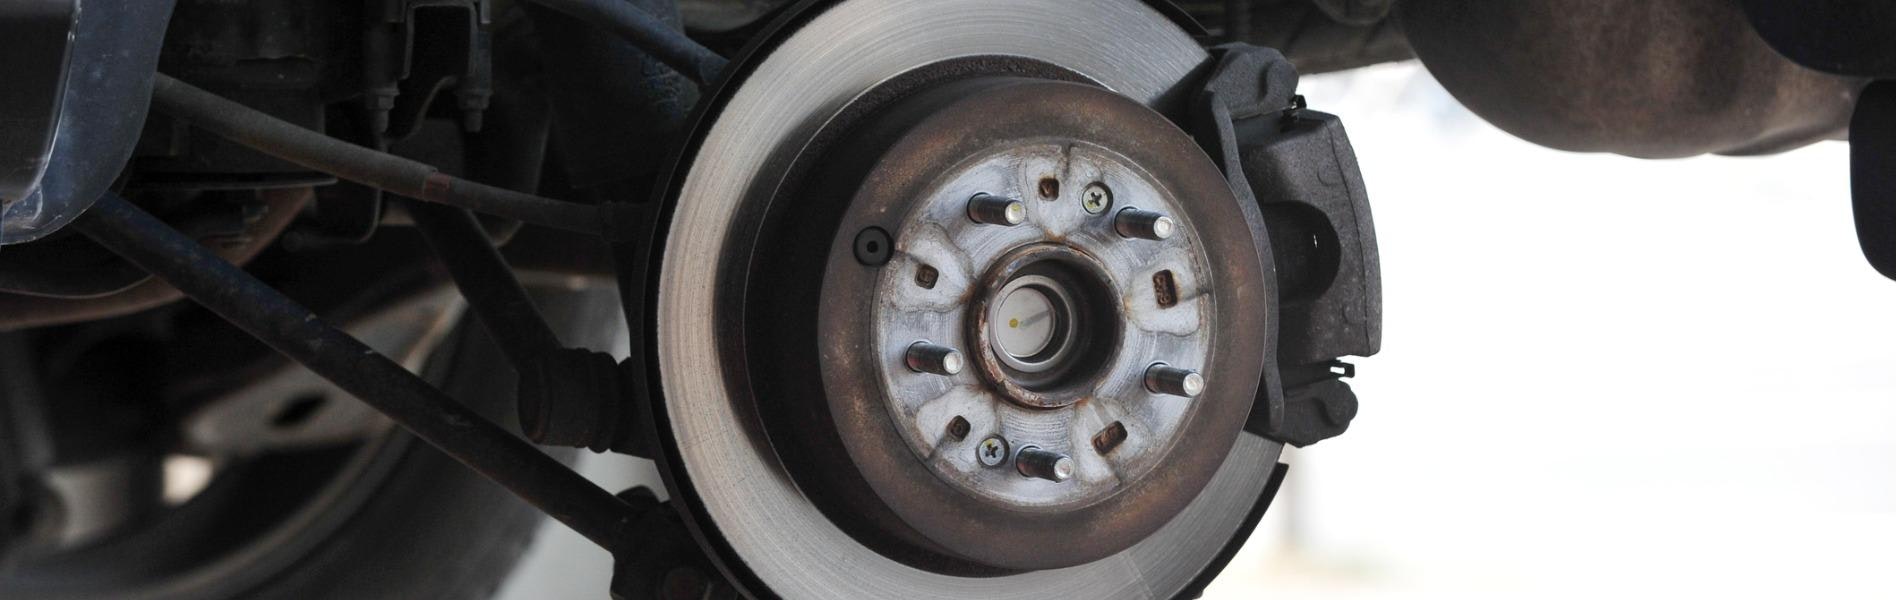 What Is the Cost of Brake Replacement?